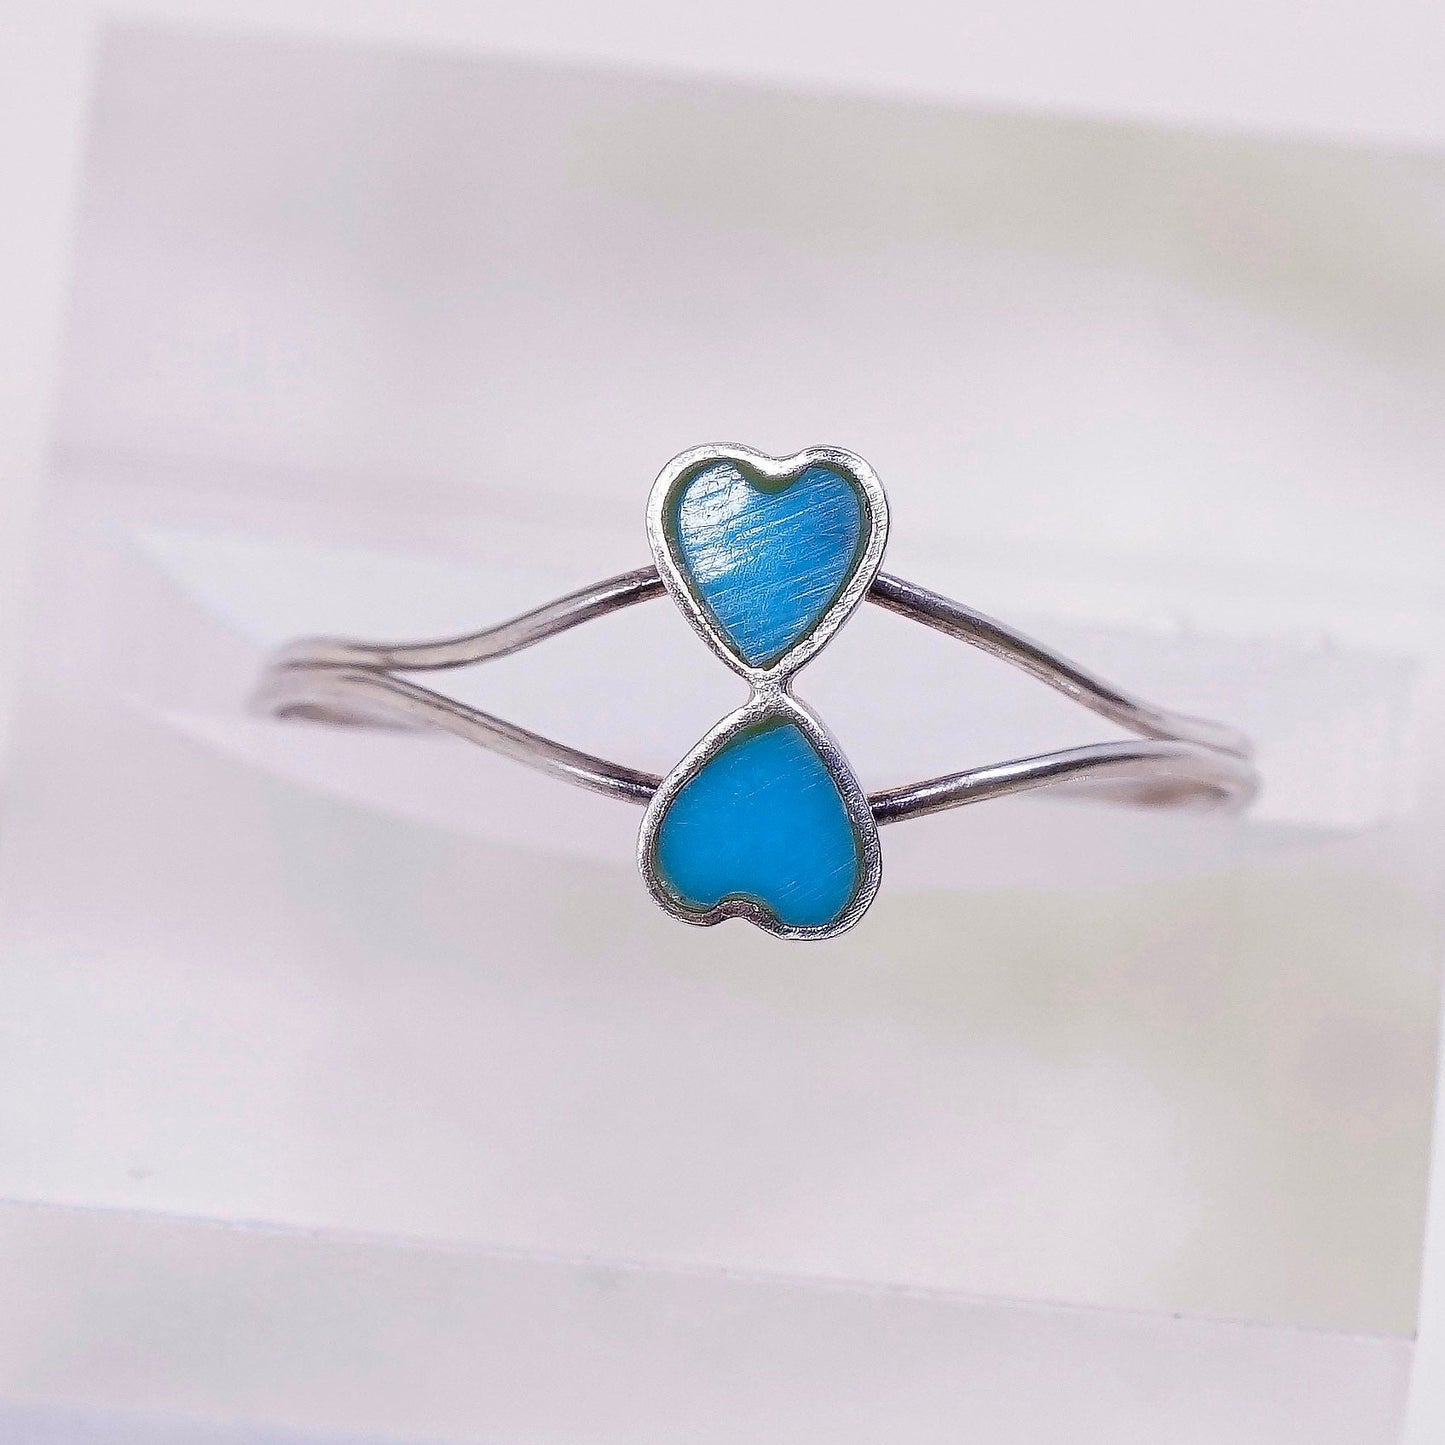 sz 8.25, vtg sterling silver handmade ring, Mexico 925 ring w/ turquoise hearts